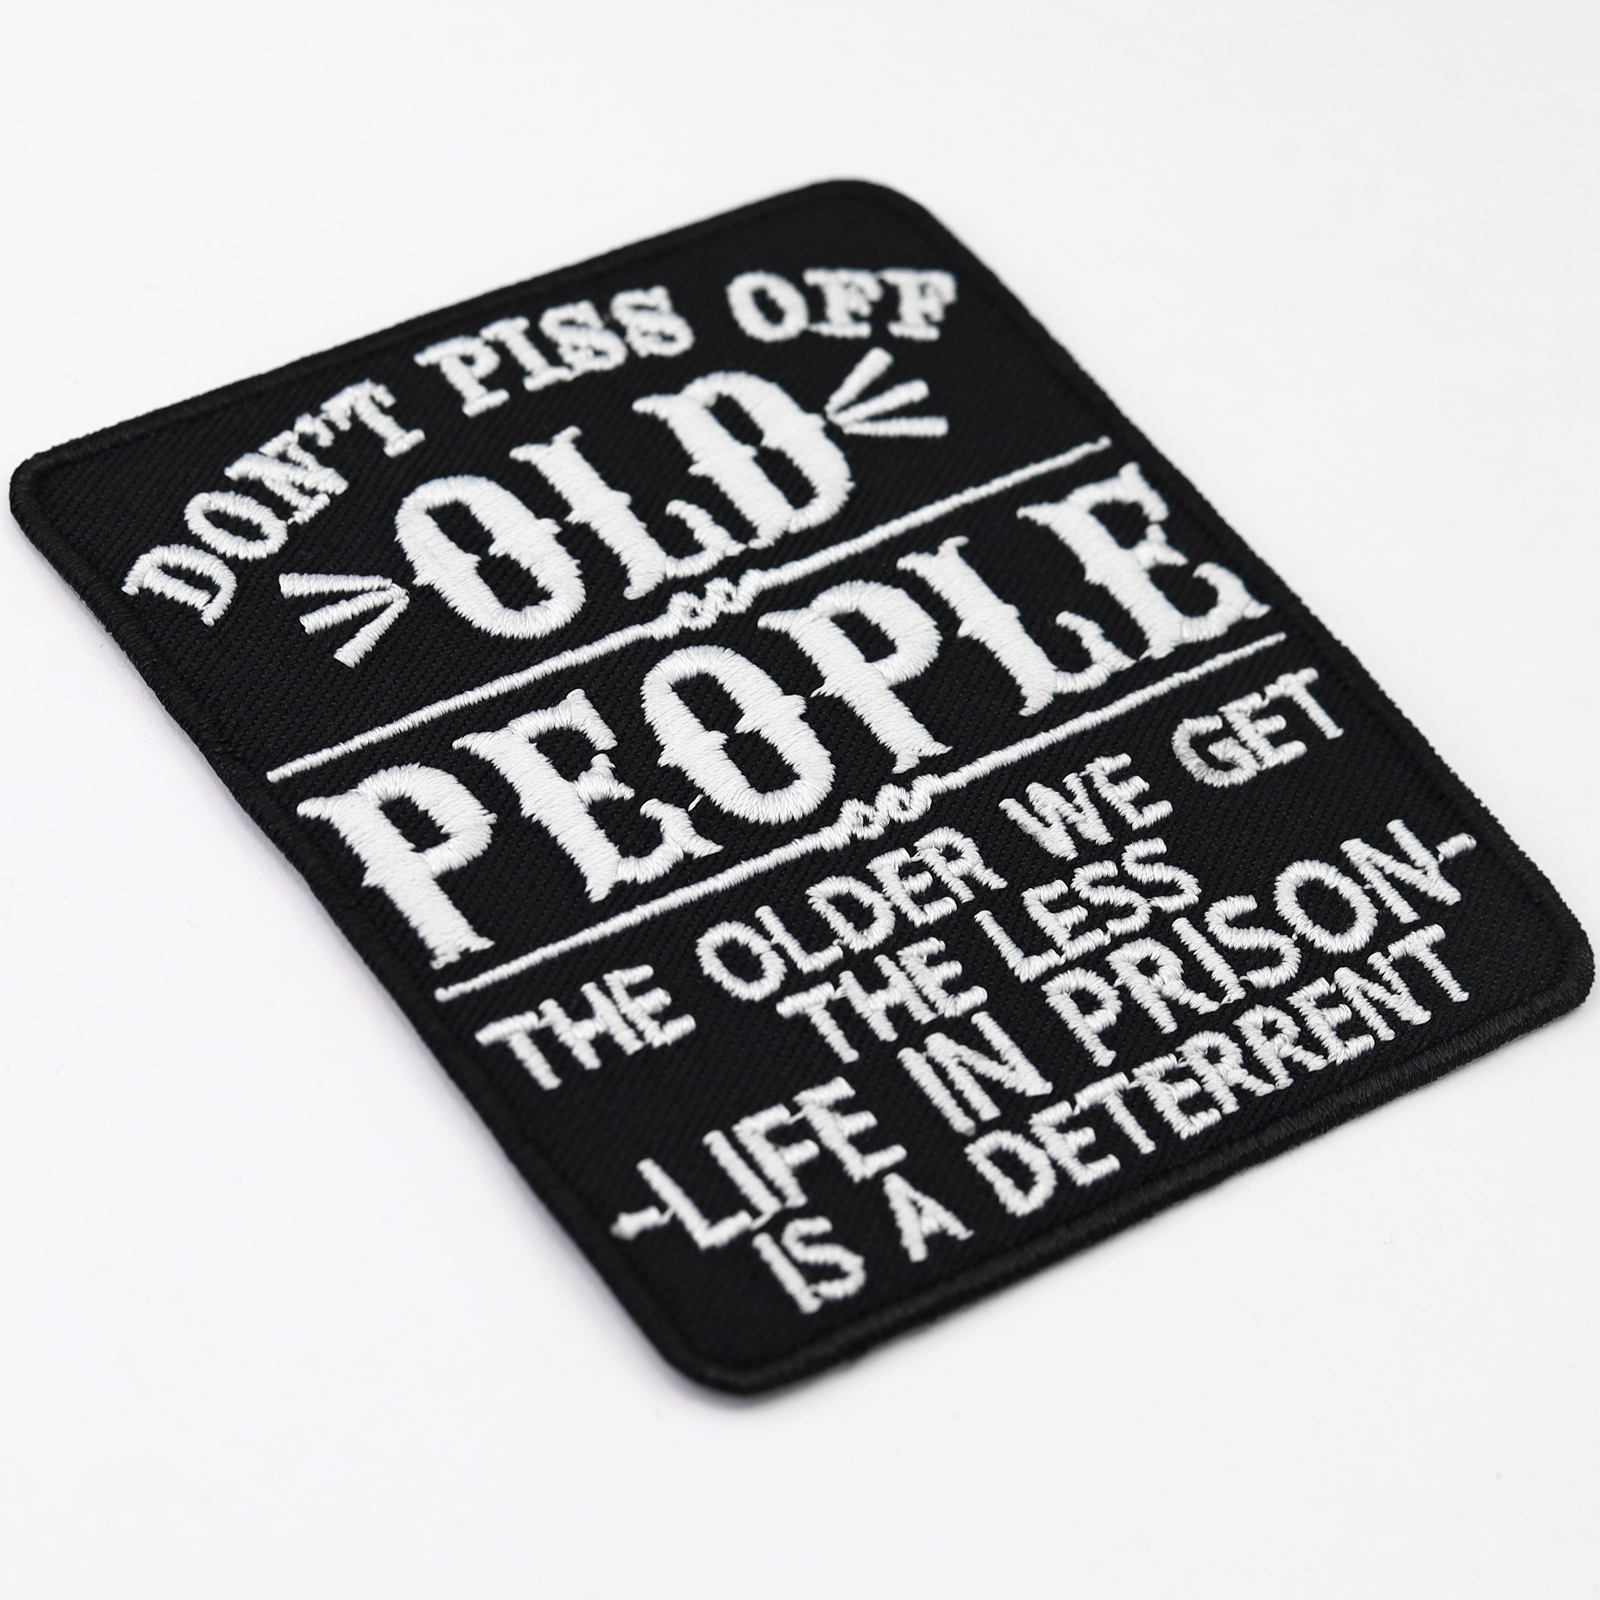 Don't piss off old people! - Patch